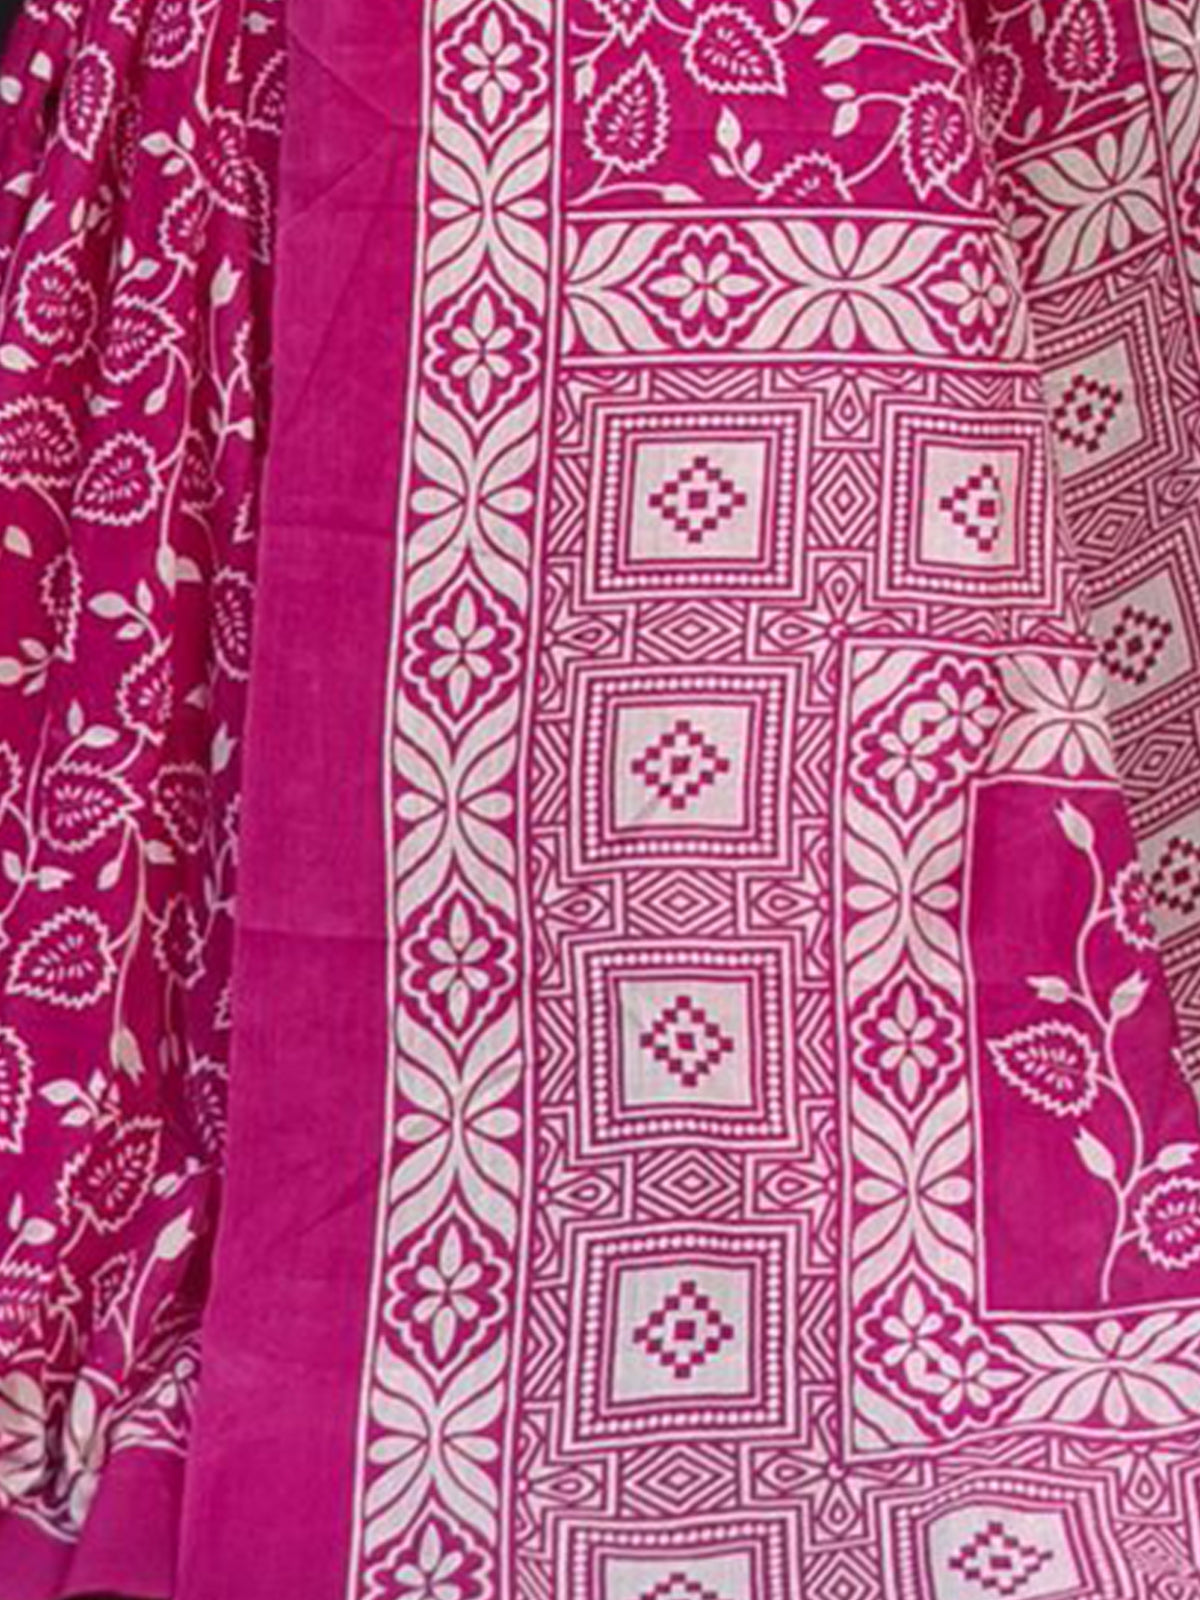 Odette Magenta Cotton Printed Saree With Unstitched Blouse For Women